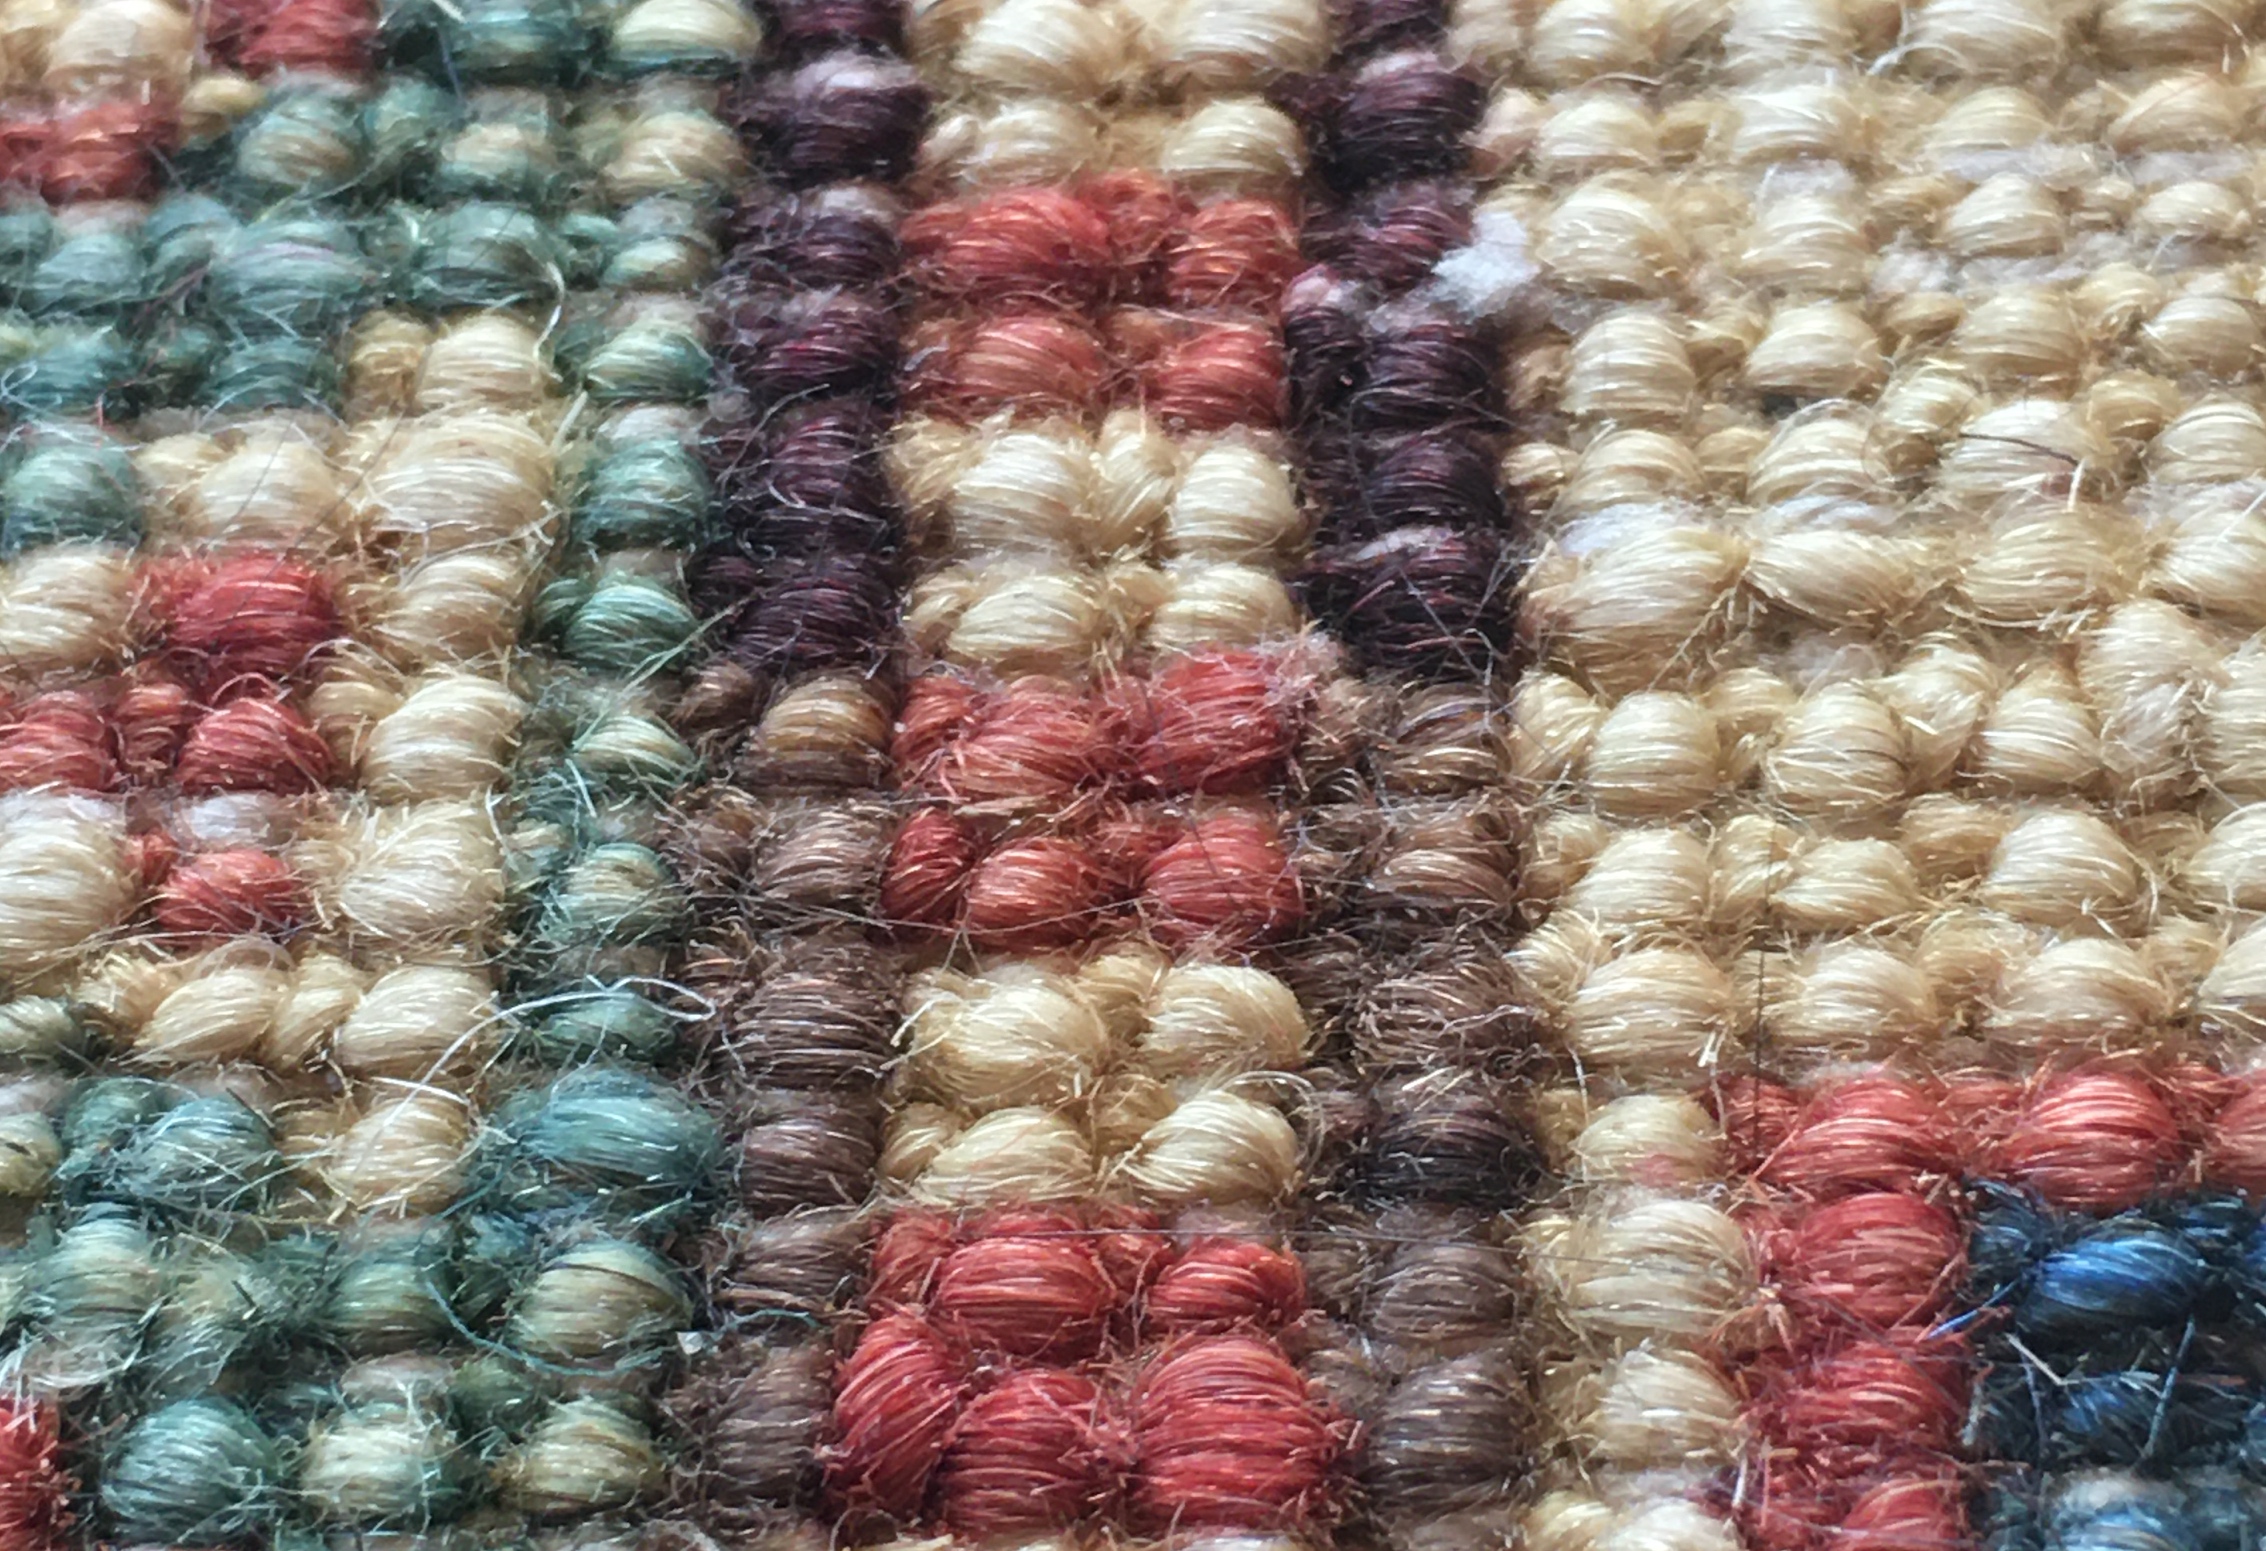 Detailed photo of rug knots from the back side showing a change in yarn color